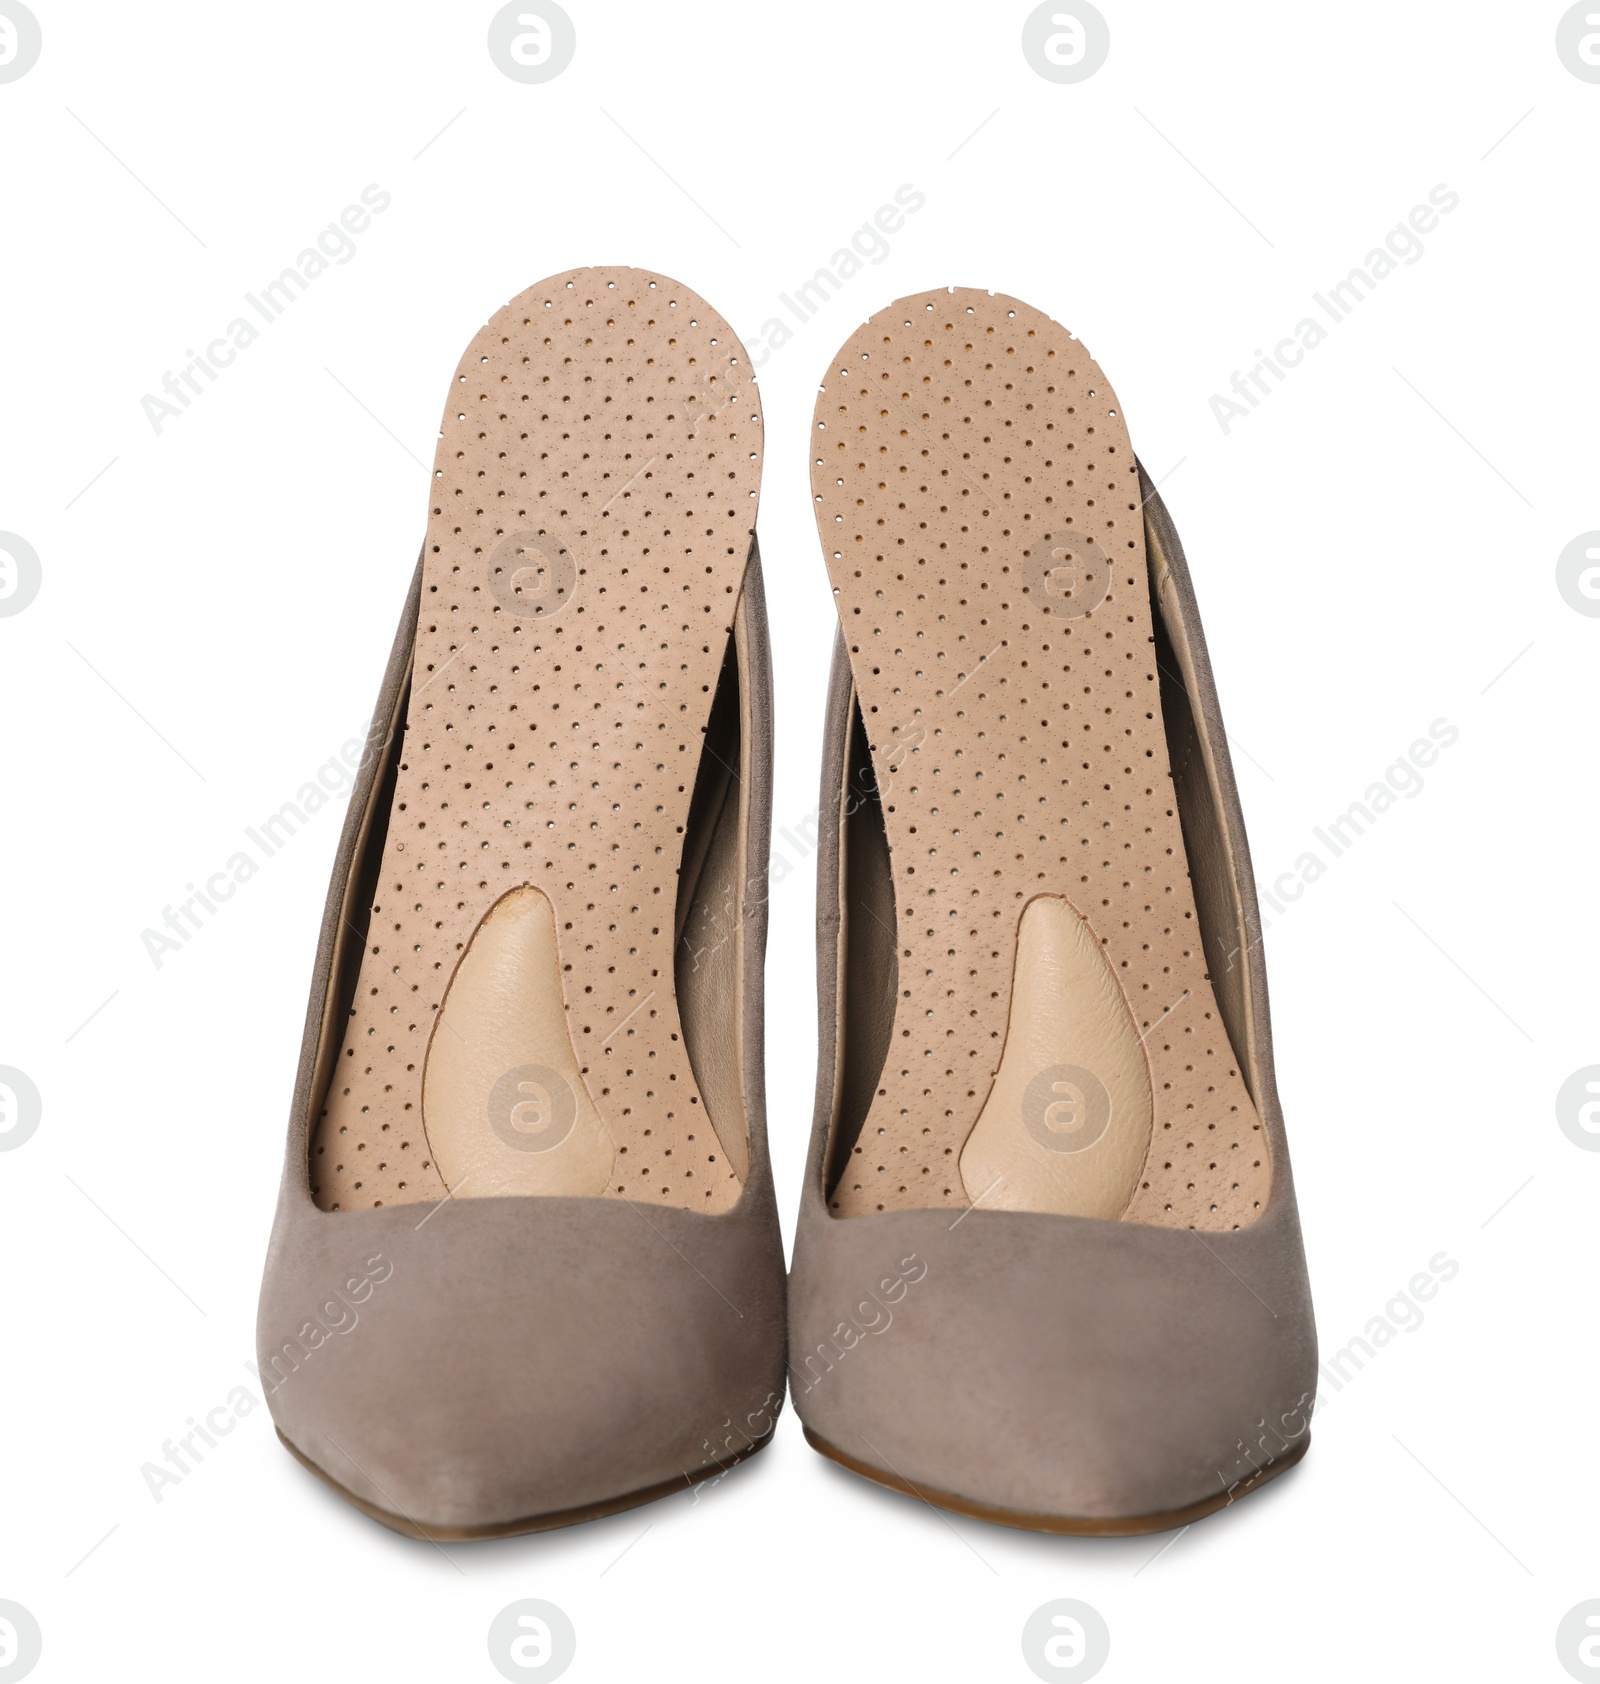 Photo of Orthopedic insoles in high heel shoes on white background